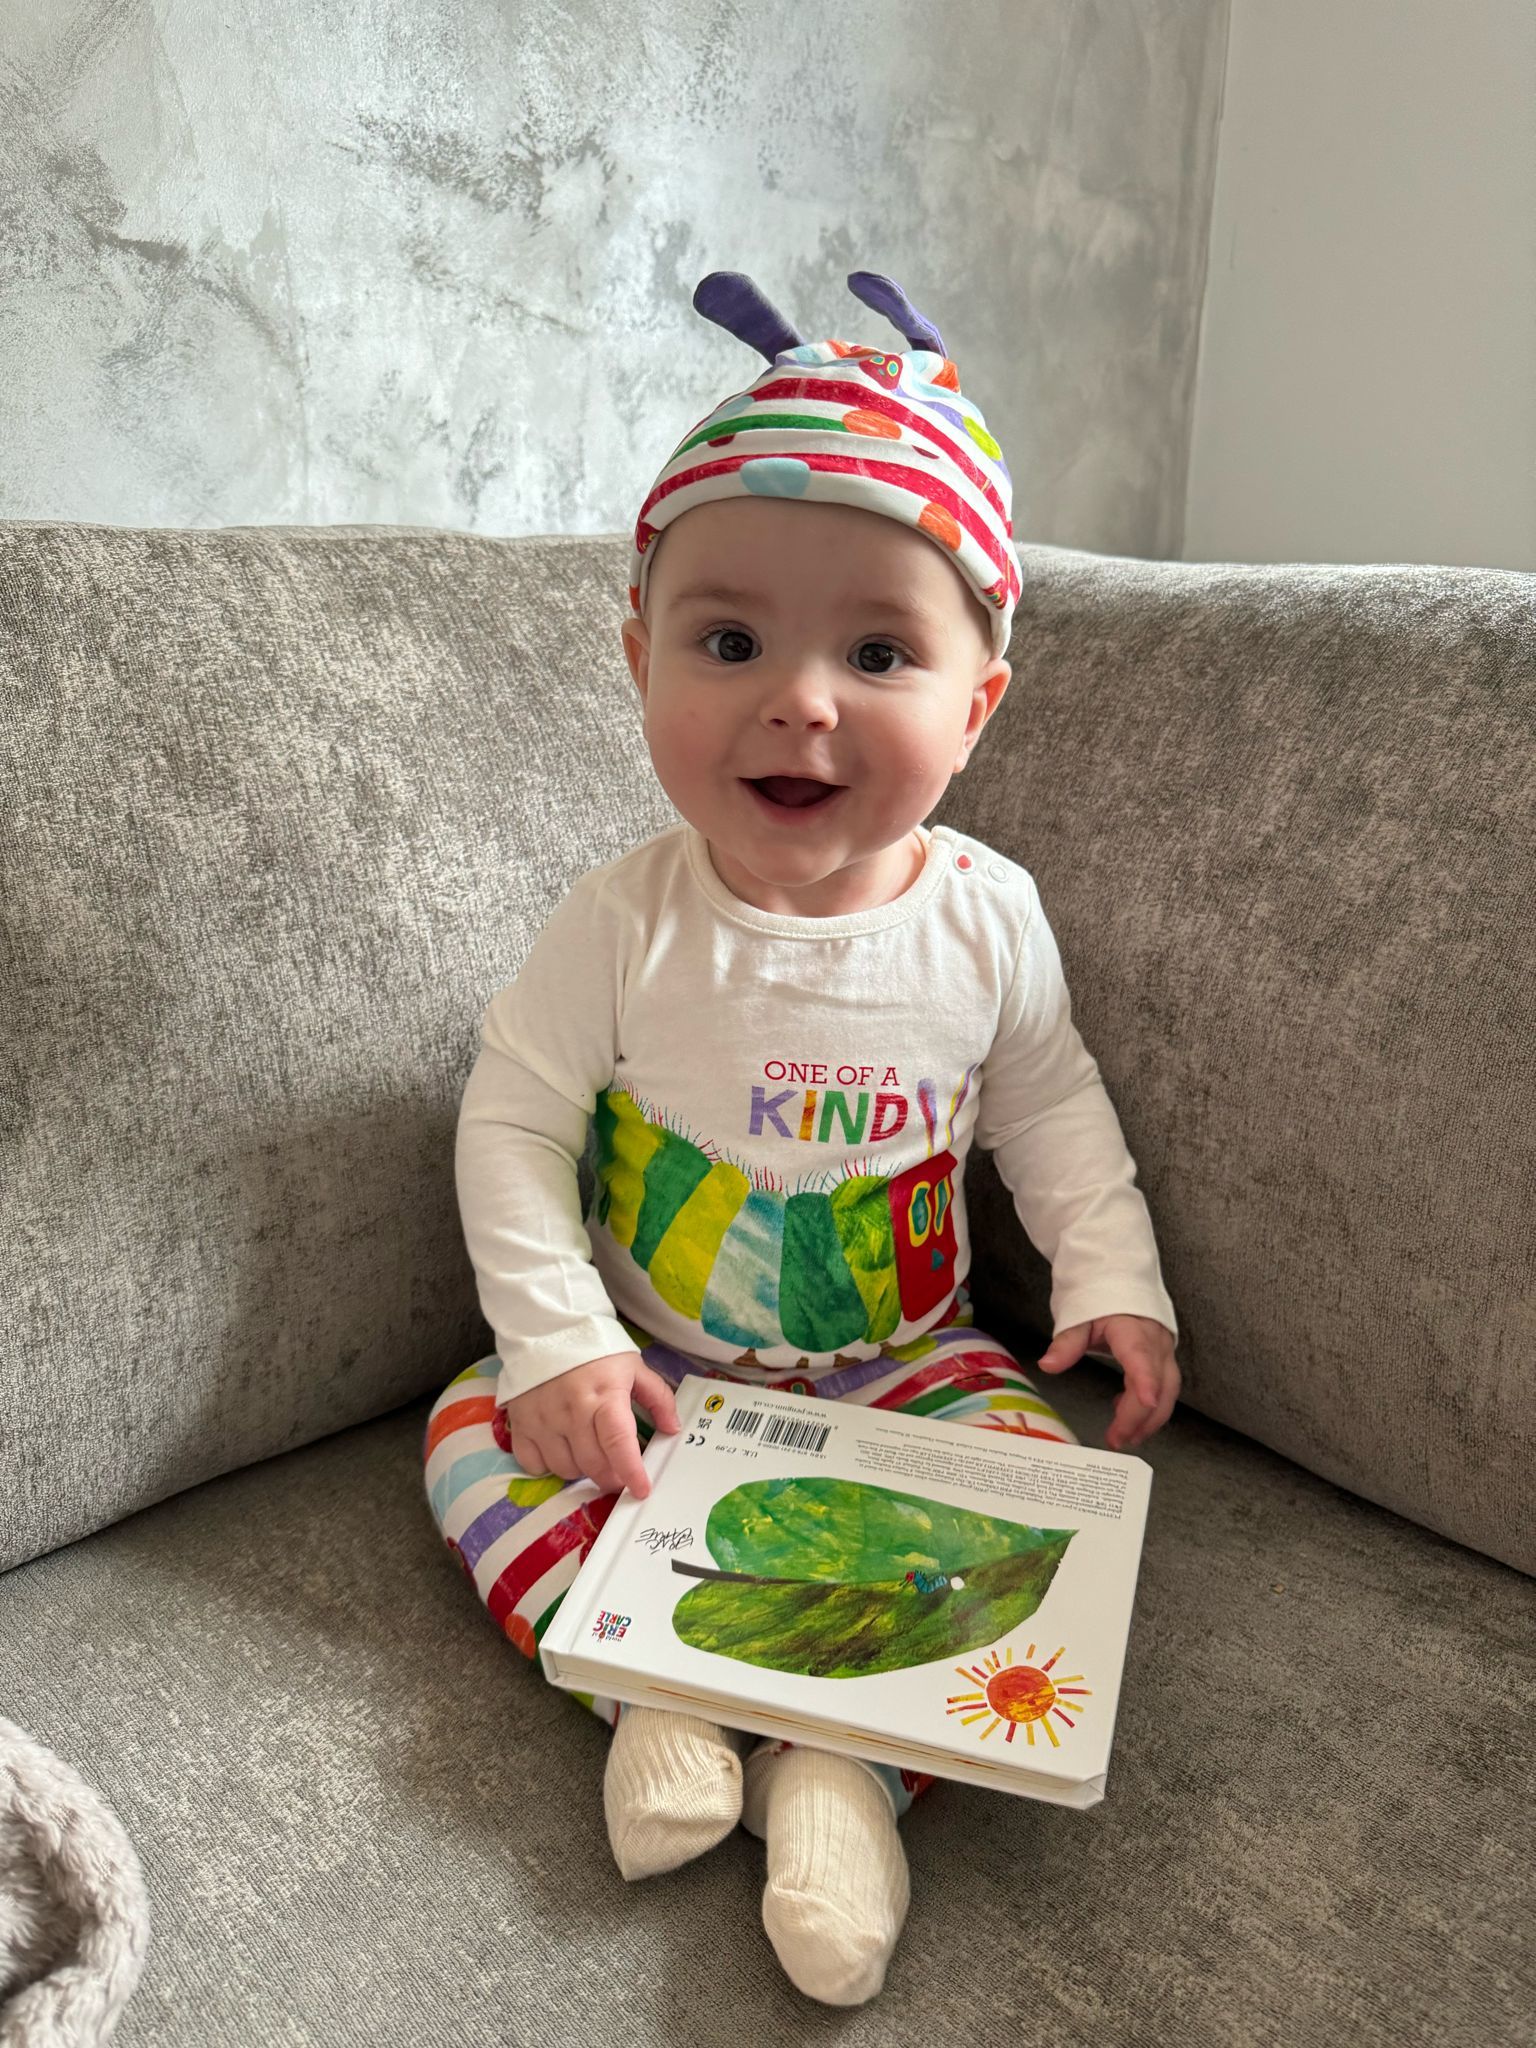 Seven-month-old Freddie Ashworth from Penketh as The very hungry caterpillar